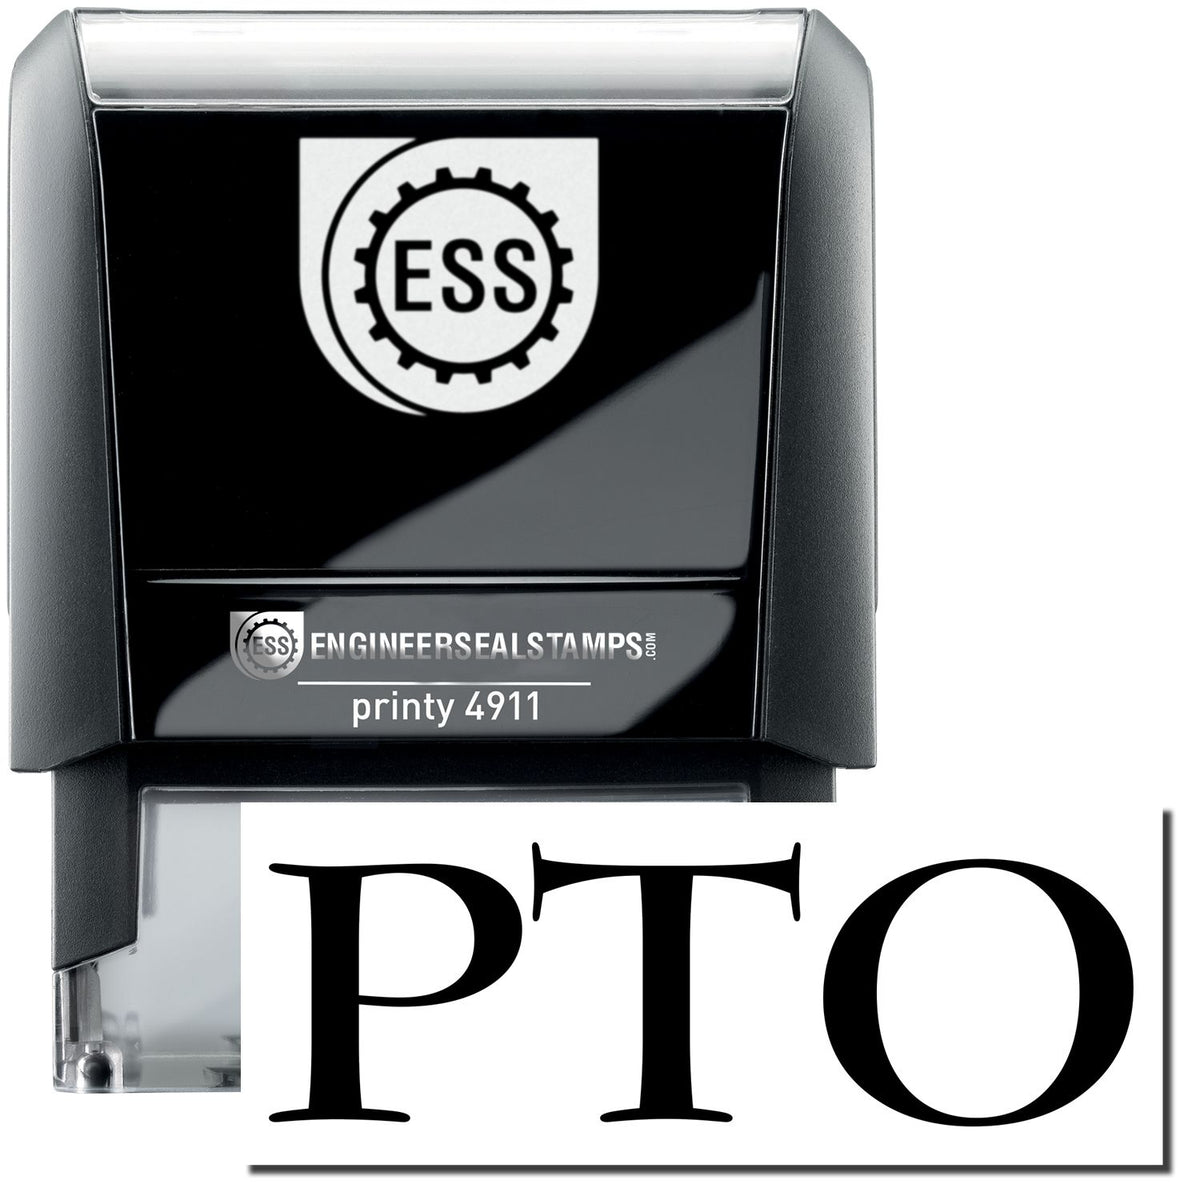 A self-inking stamp with a stamped image showing how the text &quot;PTO&quot; is displayed after stamping.